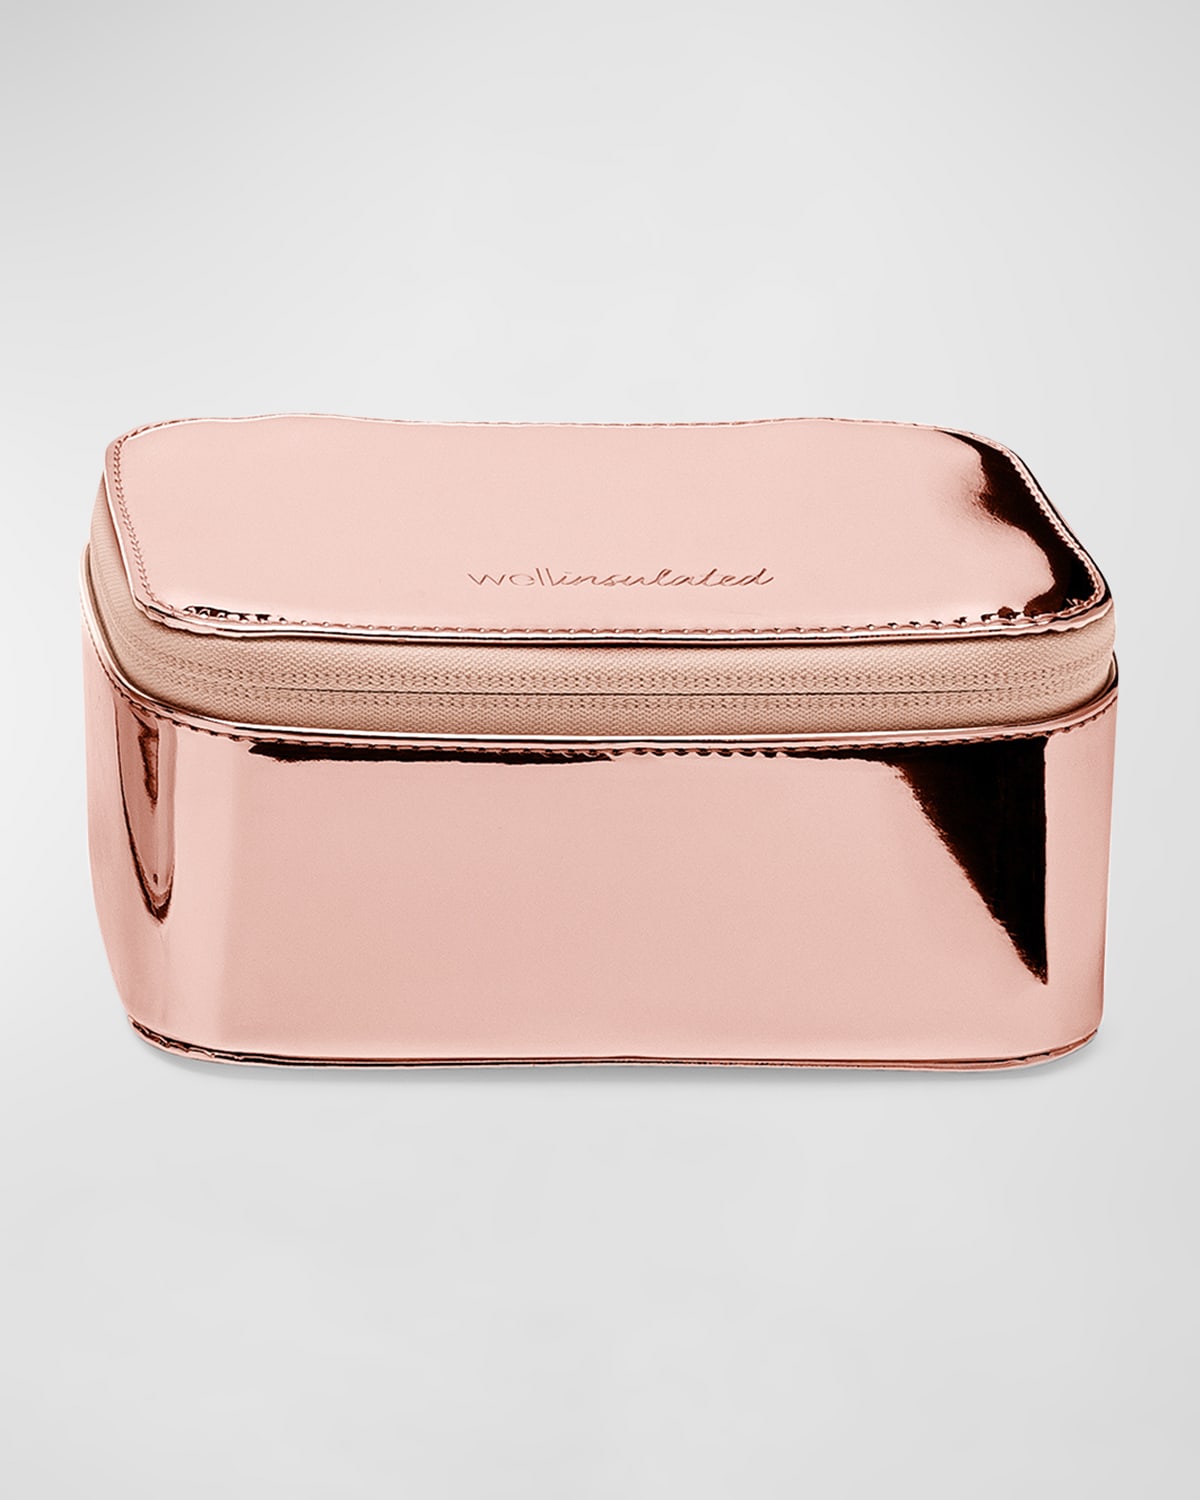 Wellinsulated Mini Performance Travel Case In Rose Gold